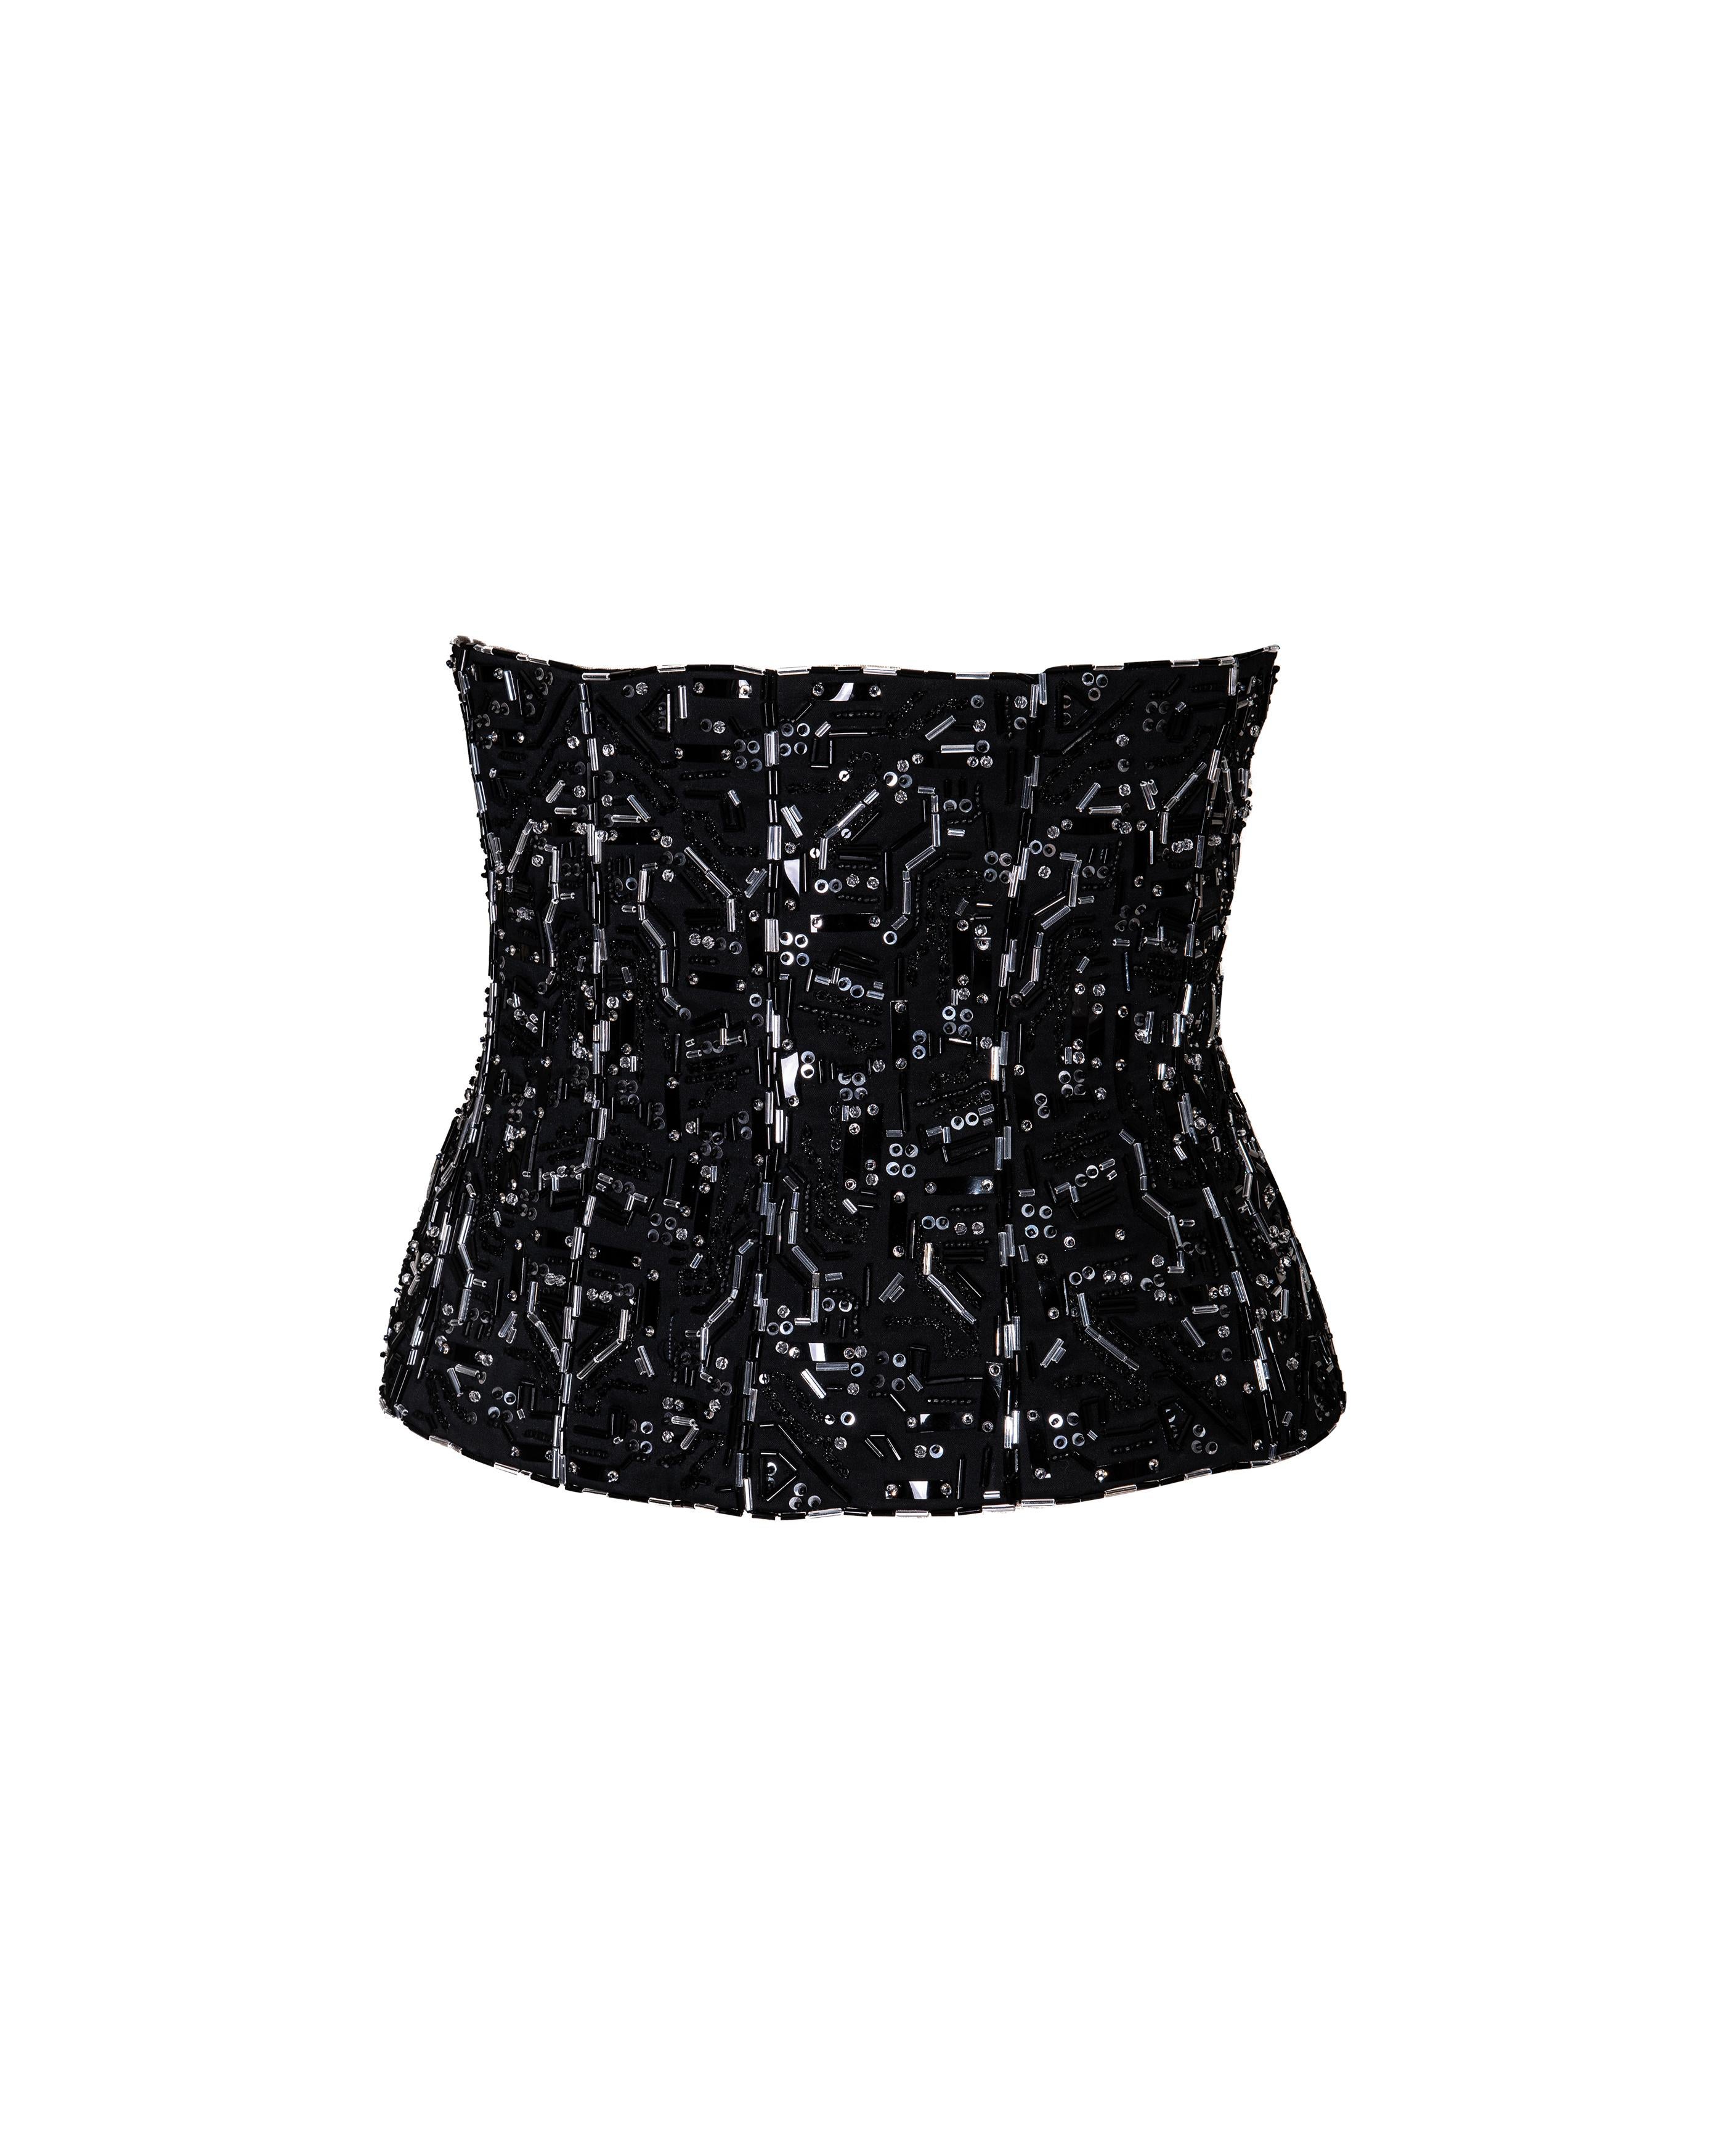 Women's A/W 1999 Givenchy by Alexander McQueen Circuit Board Black Embellished Corset For Sale